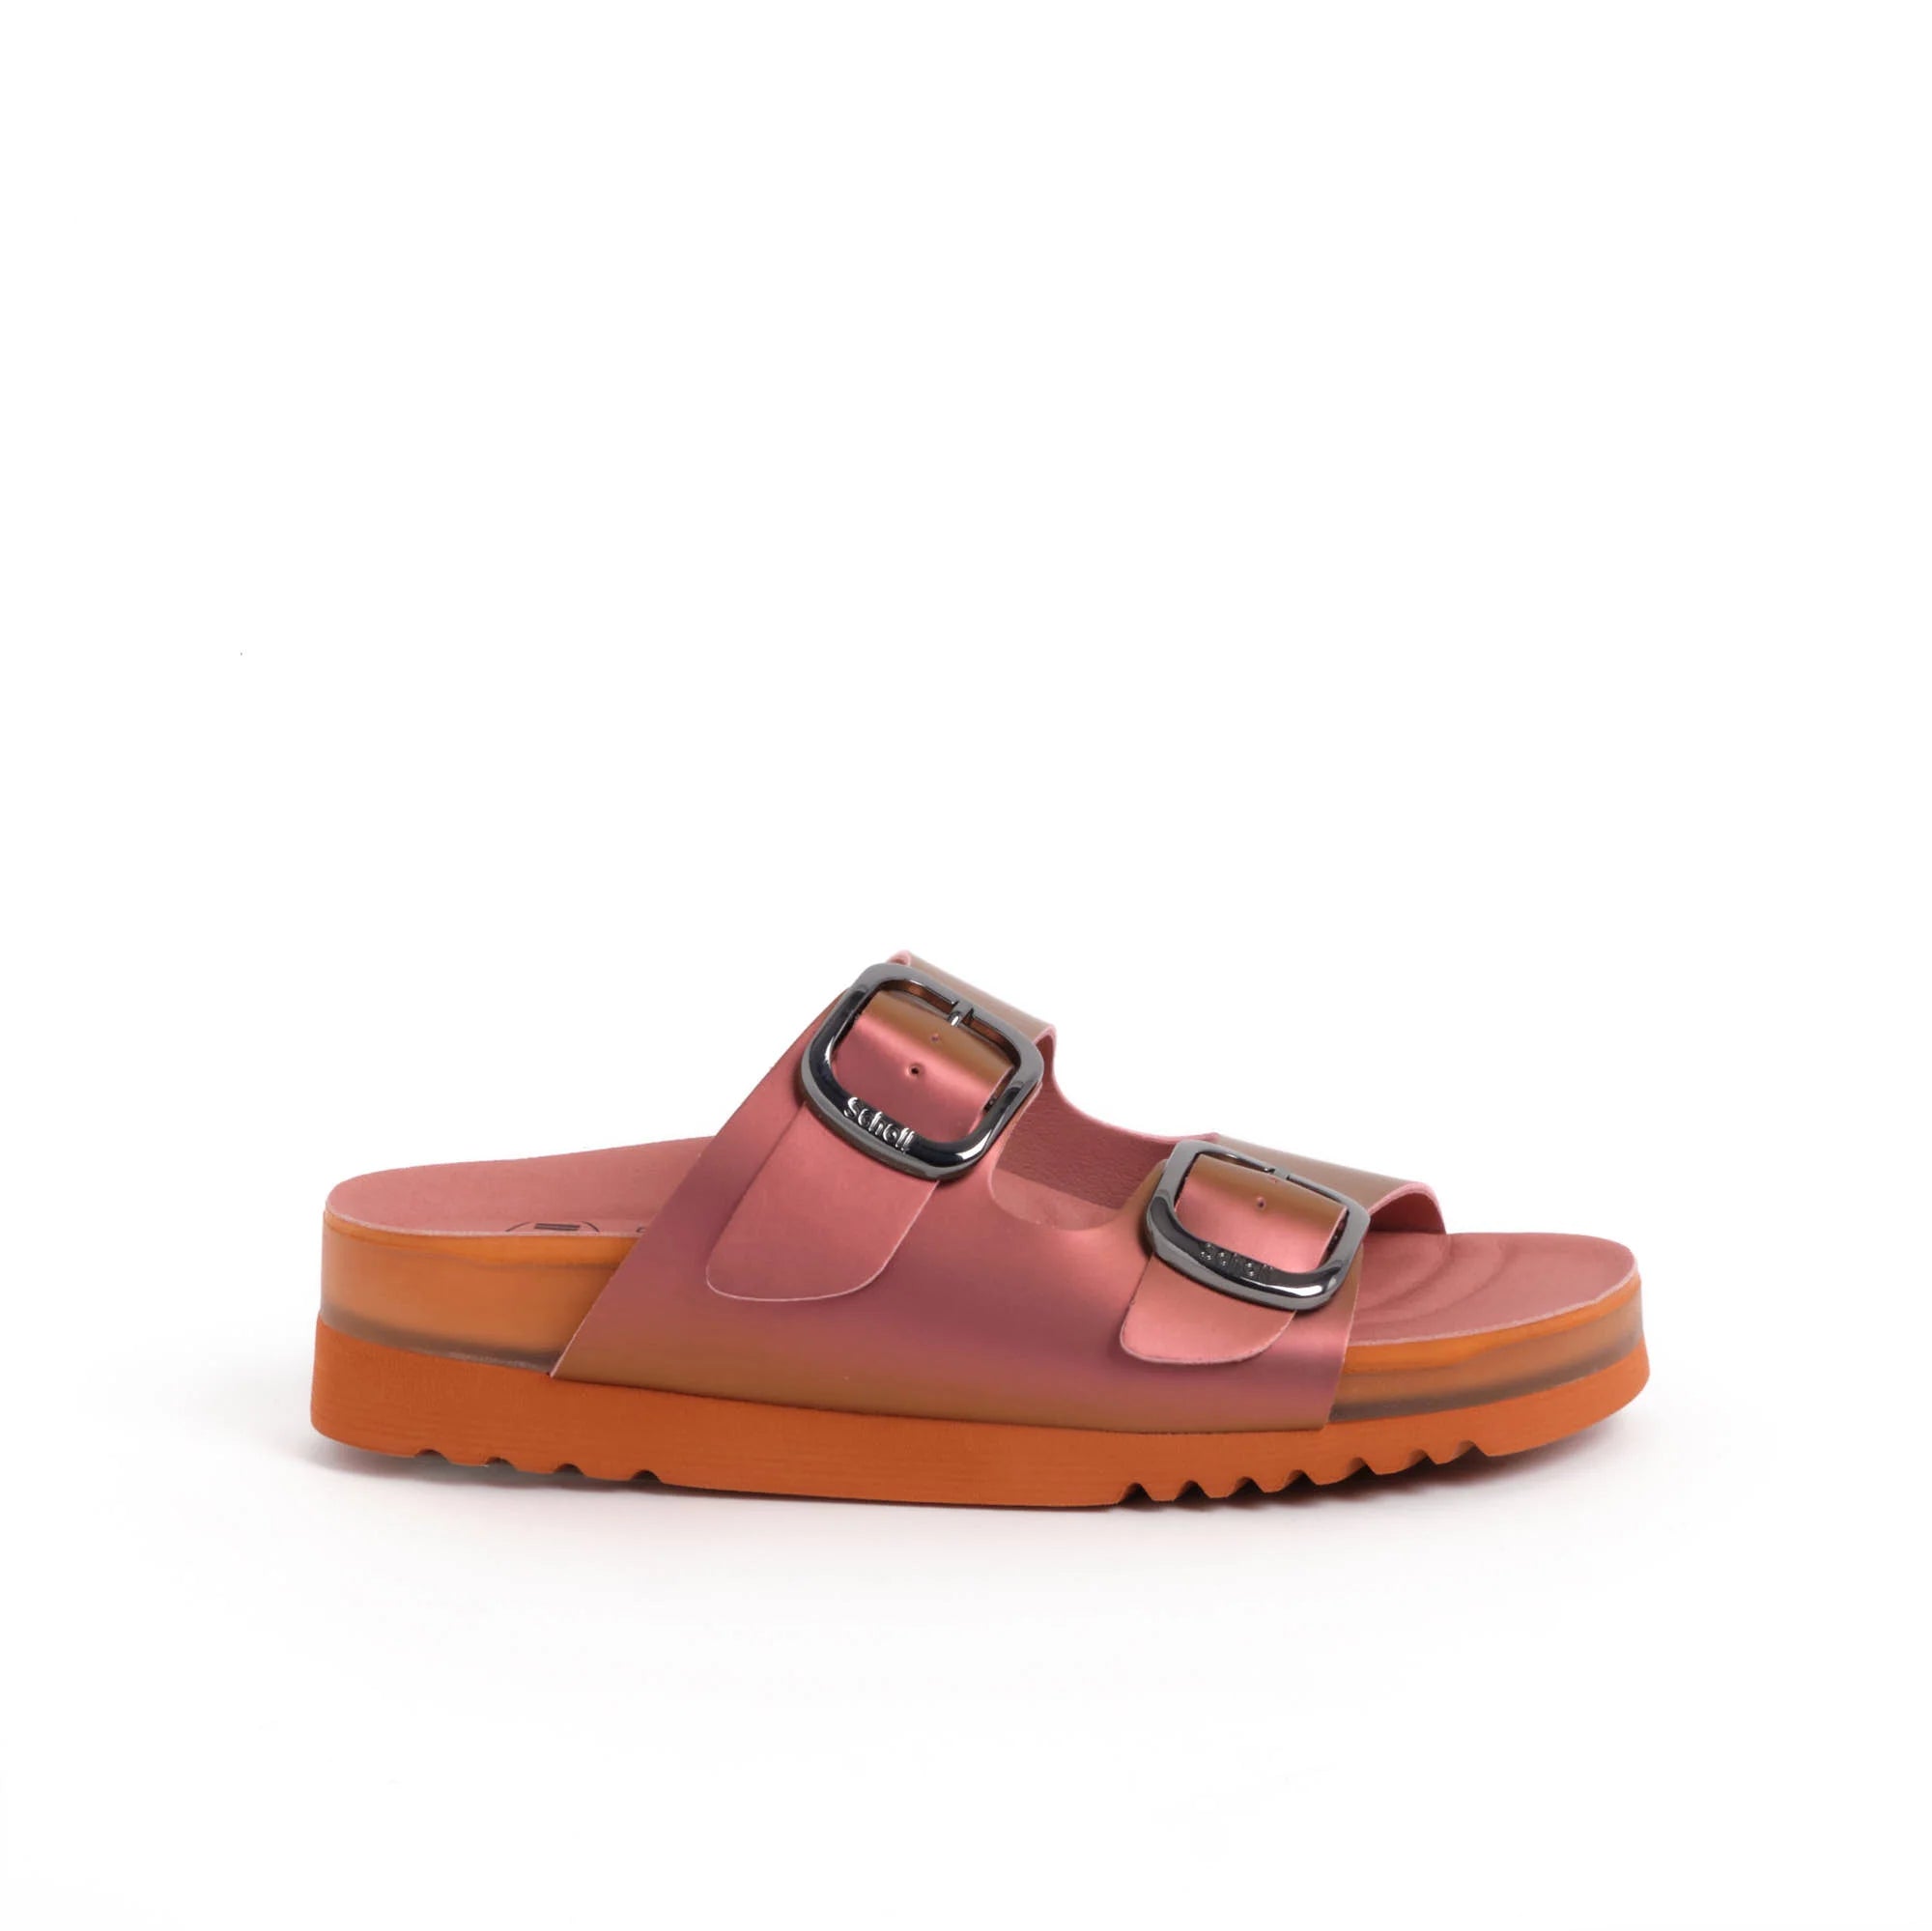 Vally Mules Synthetic Iridescent Orange N. 38 - Vally Mules Synthetic Iridescent Orange N. 38